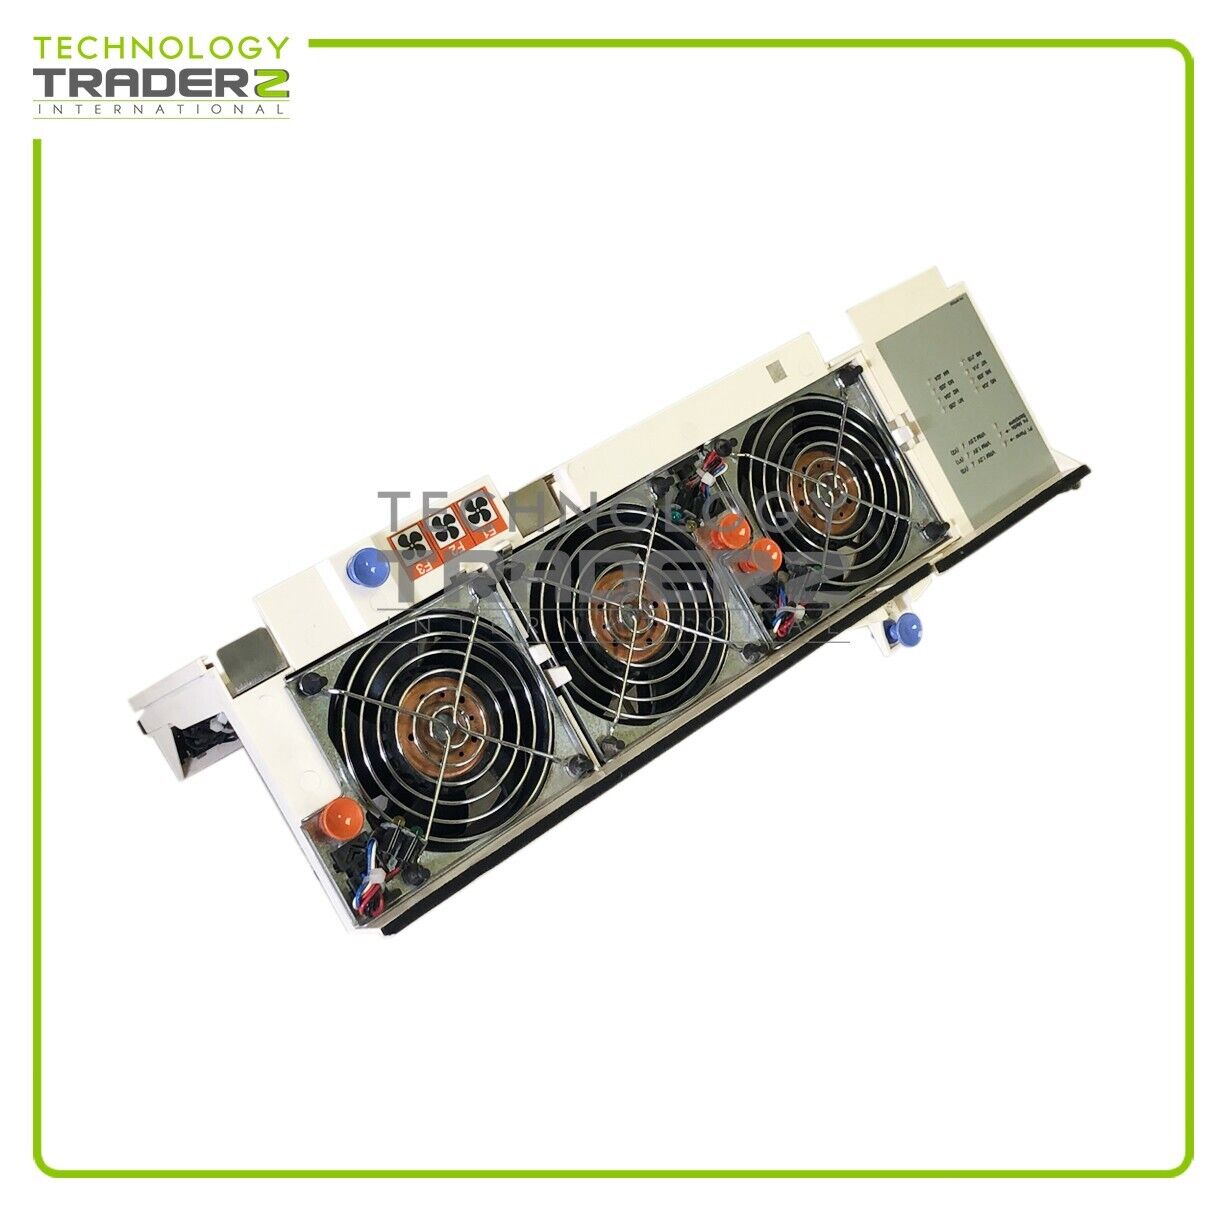 97P2304 IBM P615/P275 Triple Cooling Fan Tray Assembly 53P5928 W/ 1x Cable